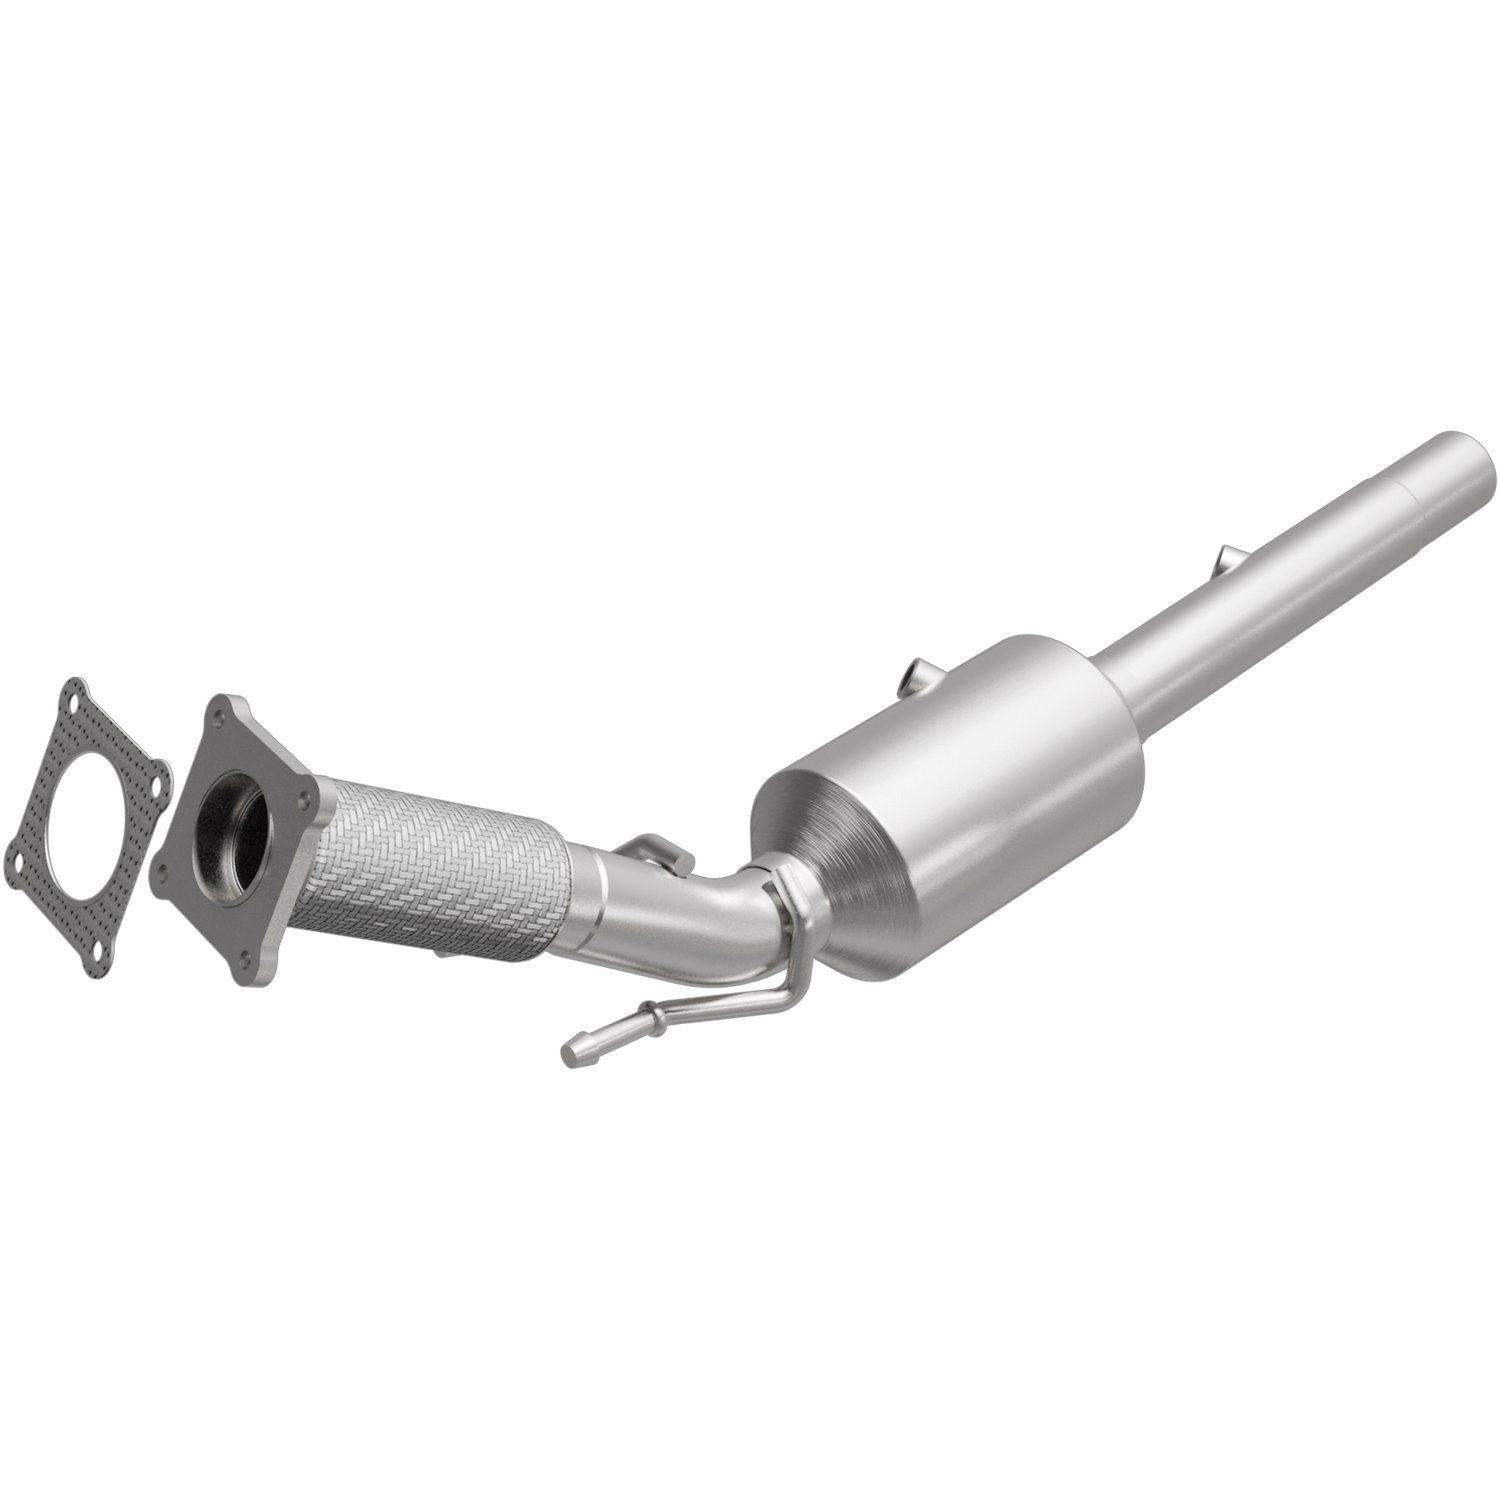 5661377 California-Grade CARB-Compliant Direct-Fit Catalytic Converter for 2006-2010 Volkswagen Beetle